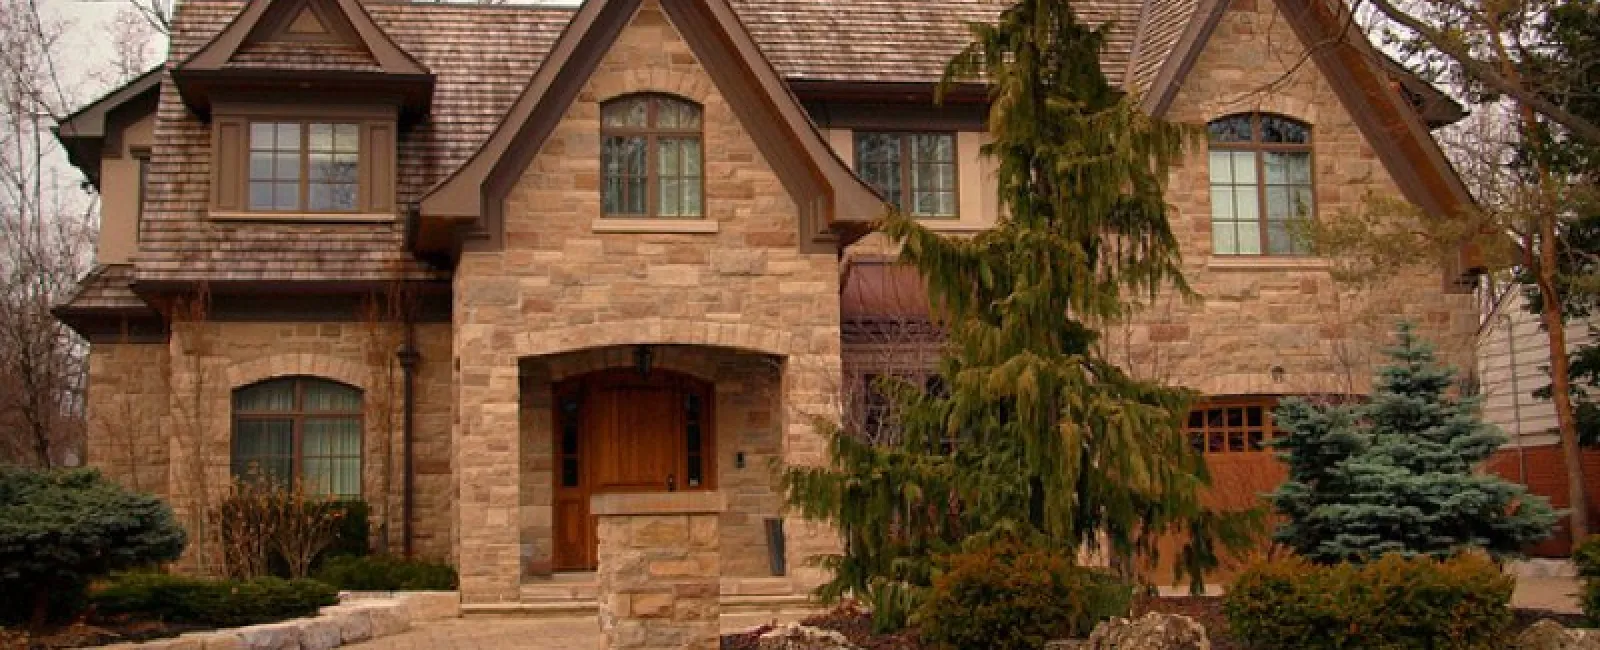 Complement Your Roof: 5 Home Appearance Tips